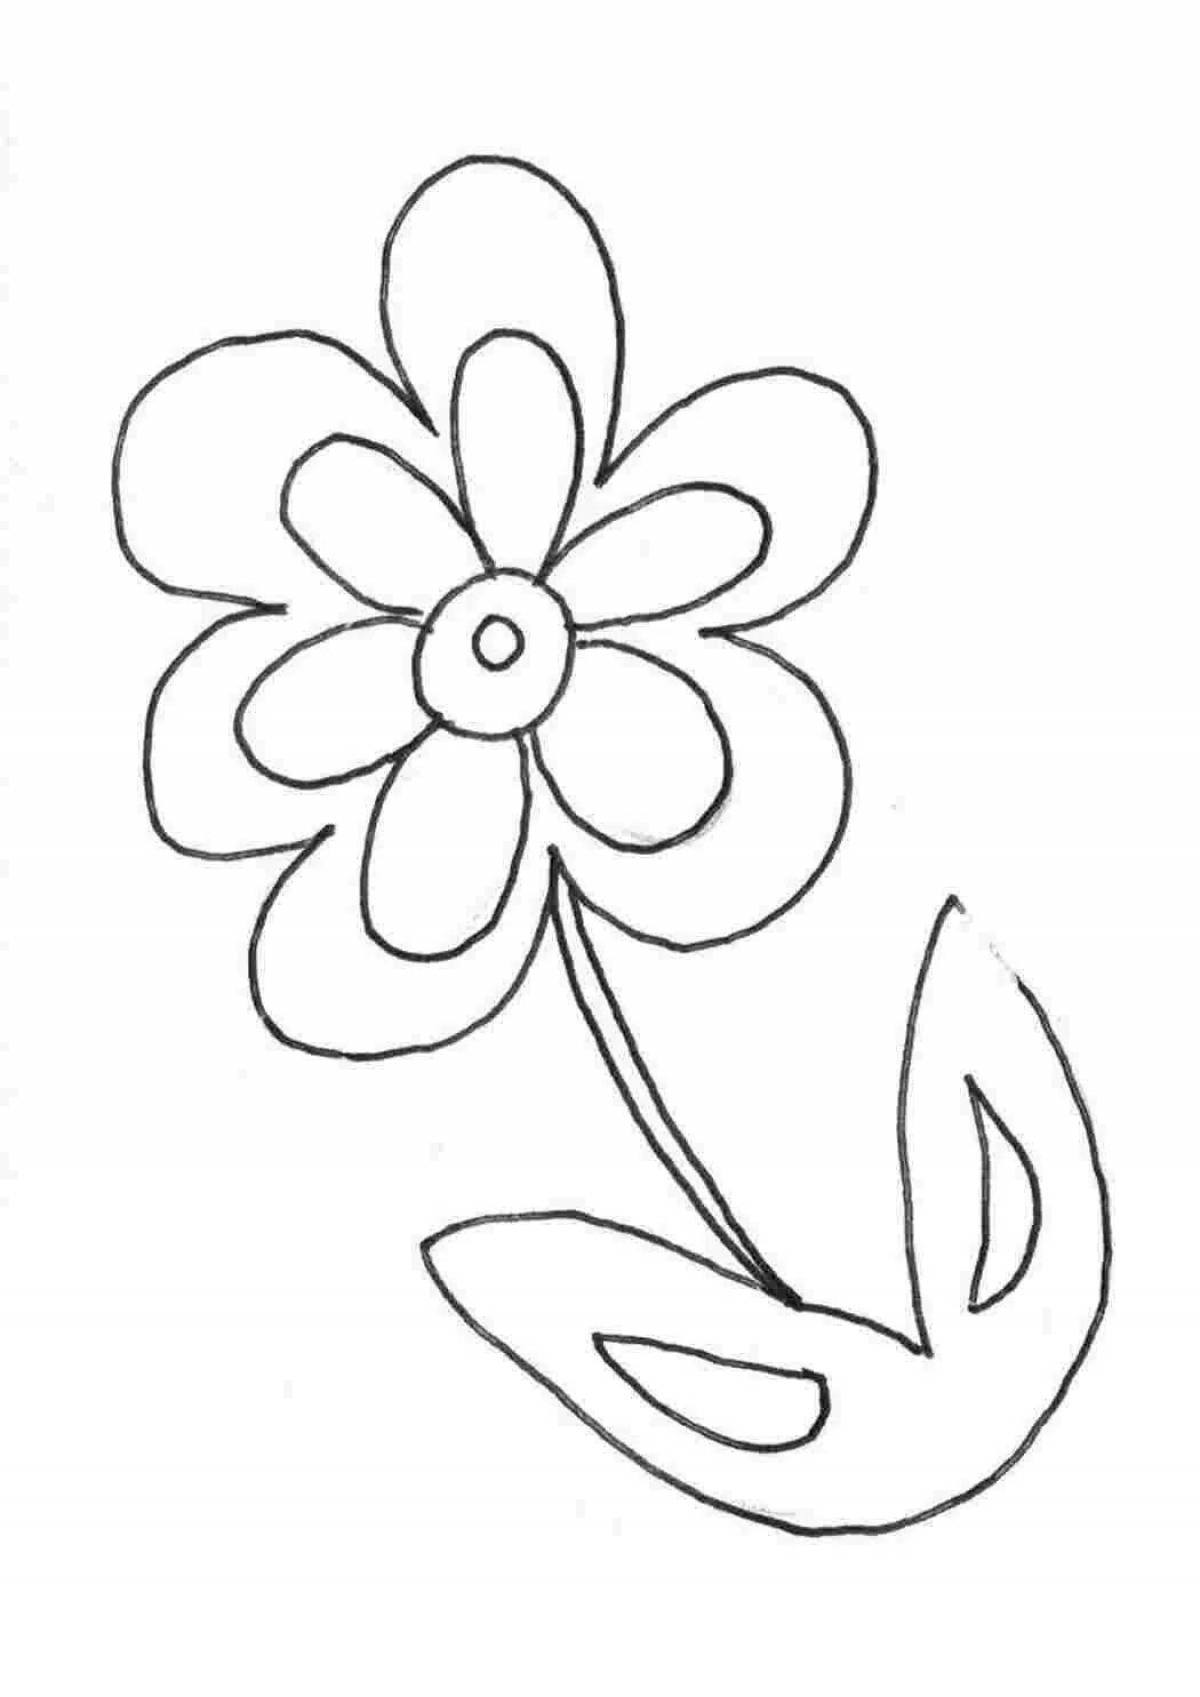 Exotic seven-flower coloring book